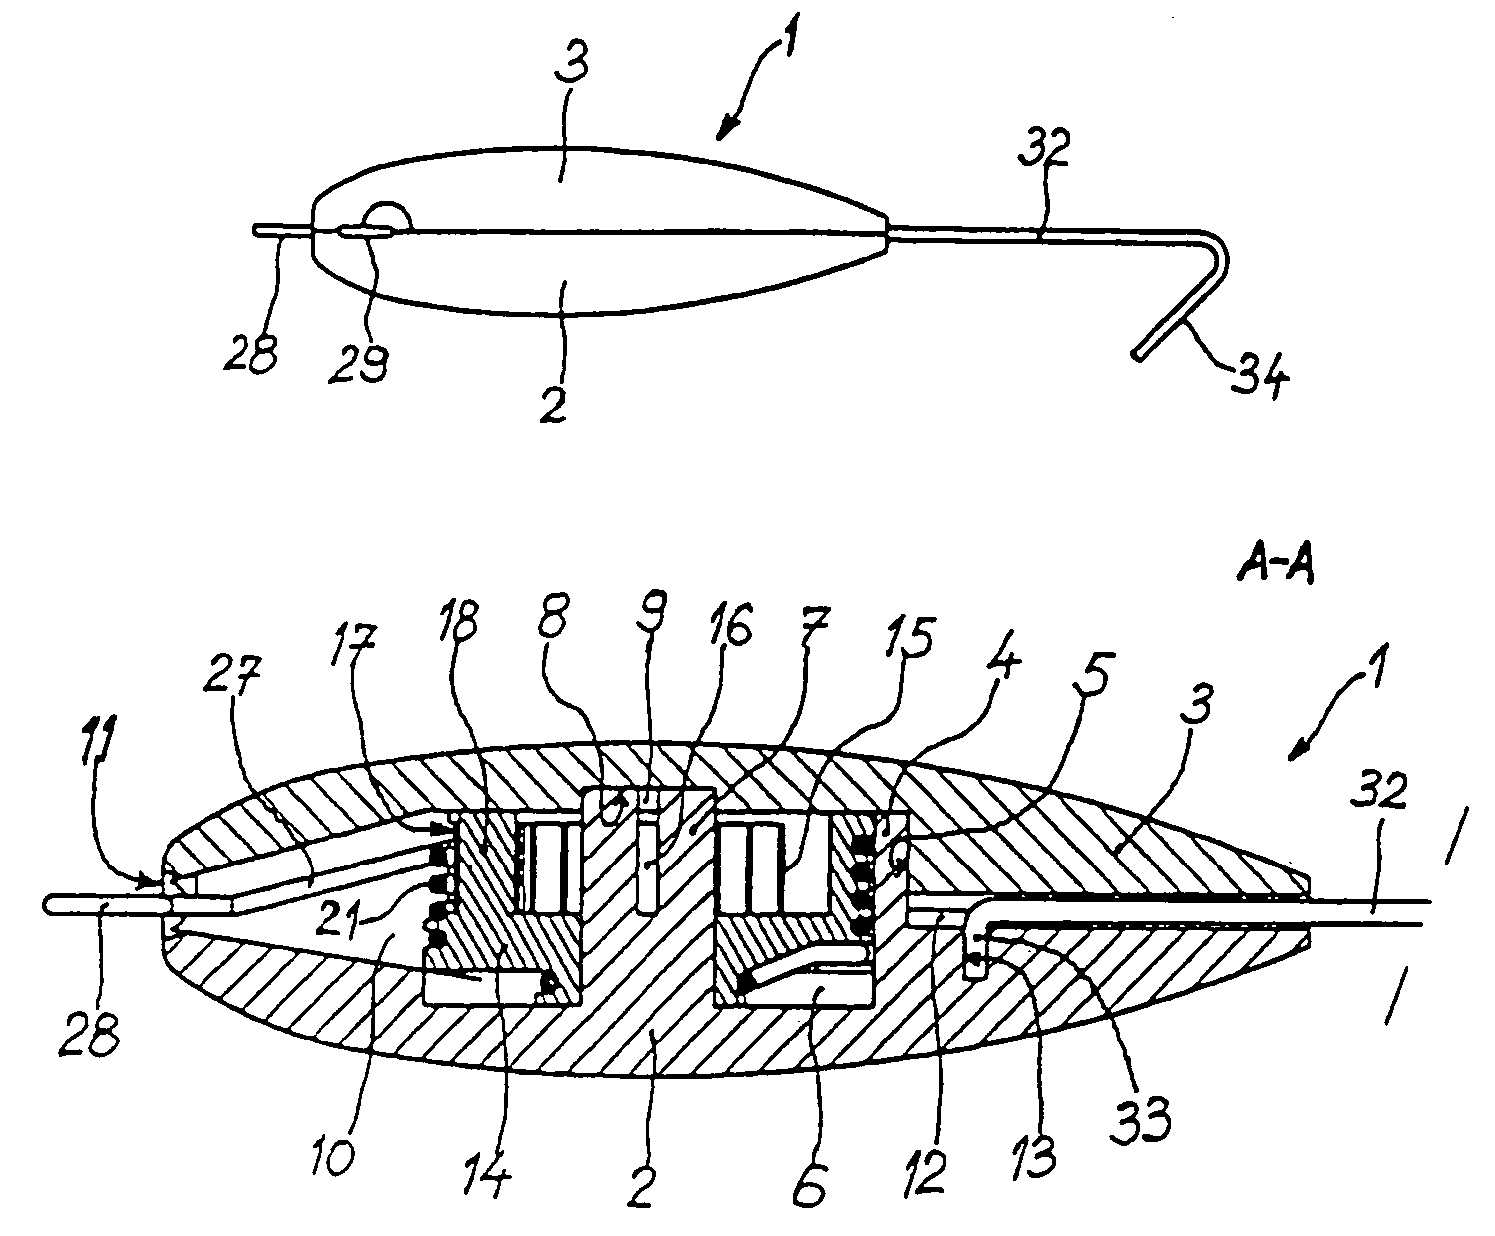 Device for winding and unwinding the lower part of fishing line